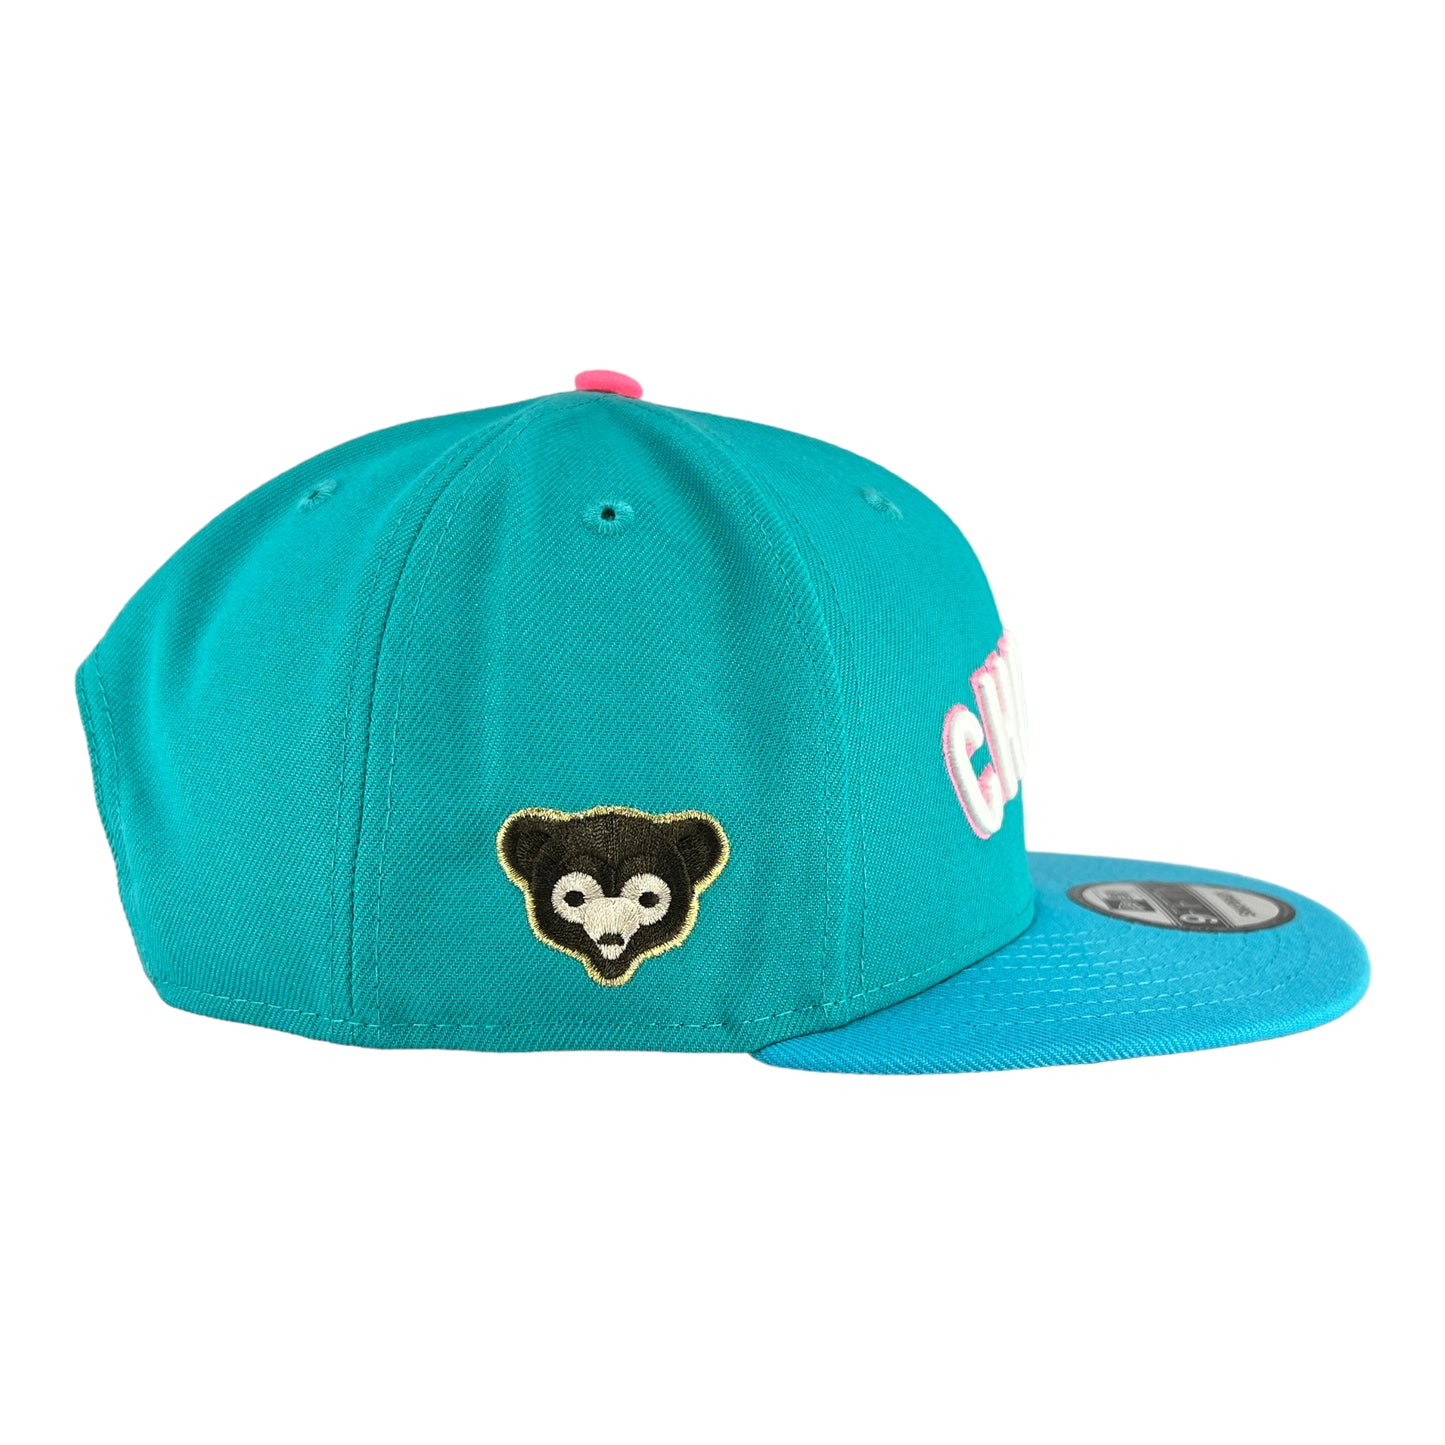 Chicago Cubs Teal/Pink New Era Low Profile 9FIFTY Snapback Hat